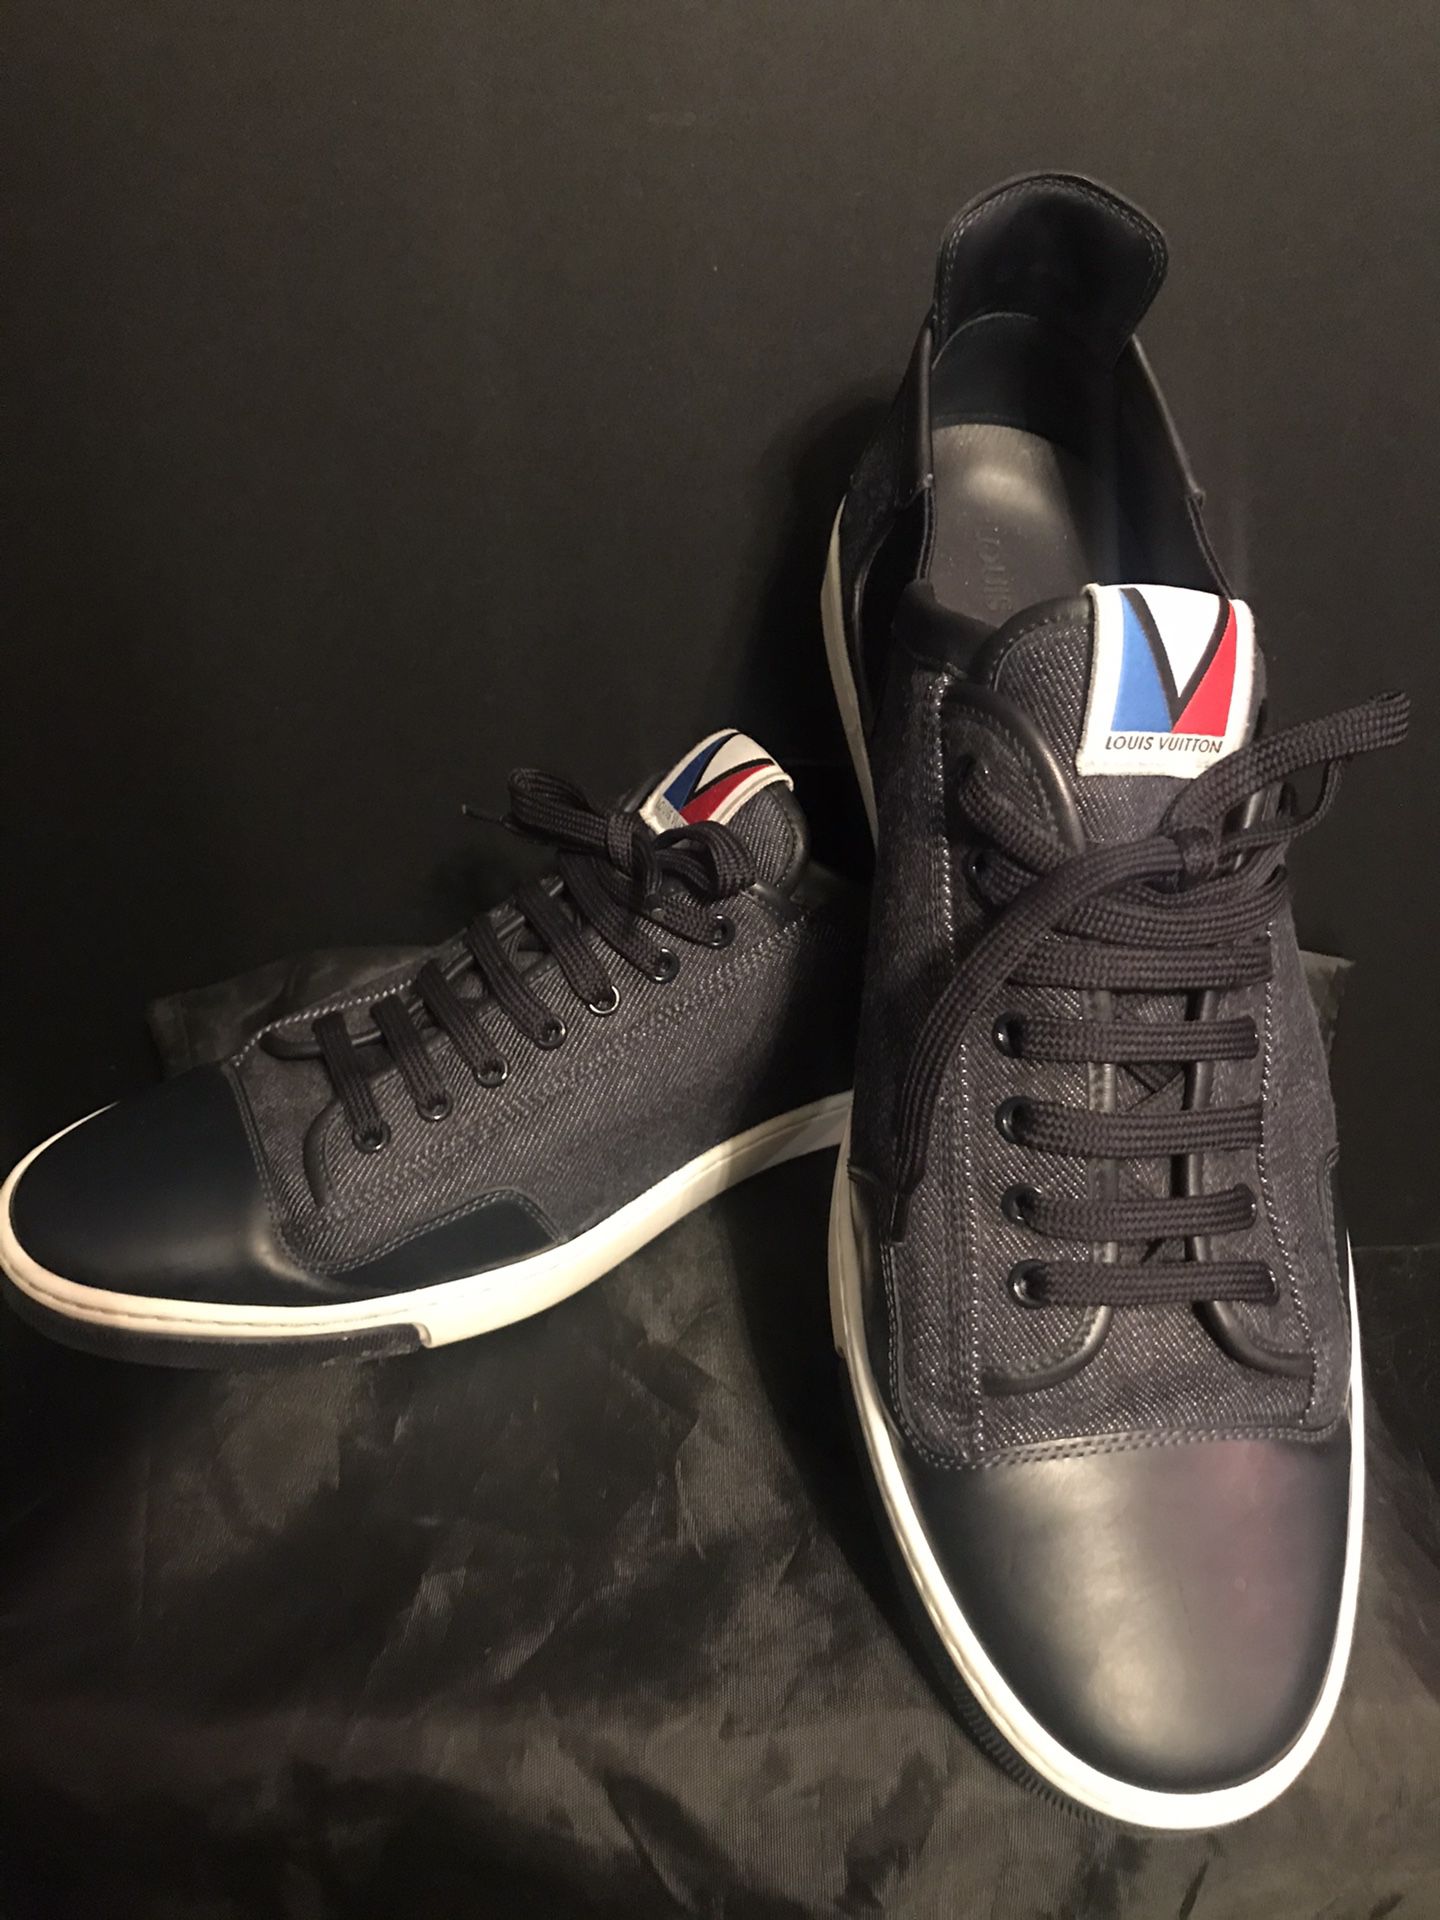 LV canvas and leather shoes